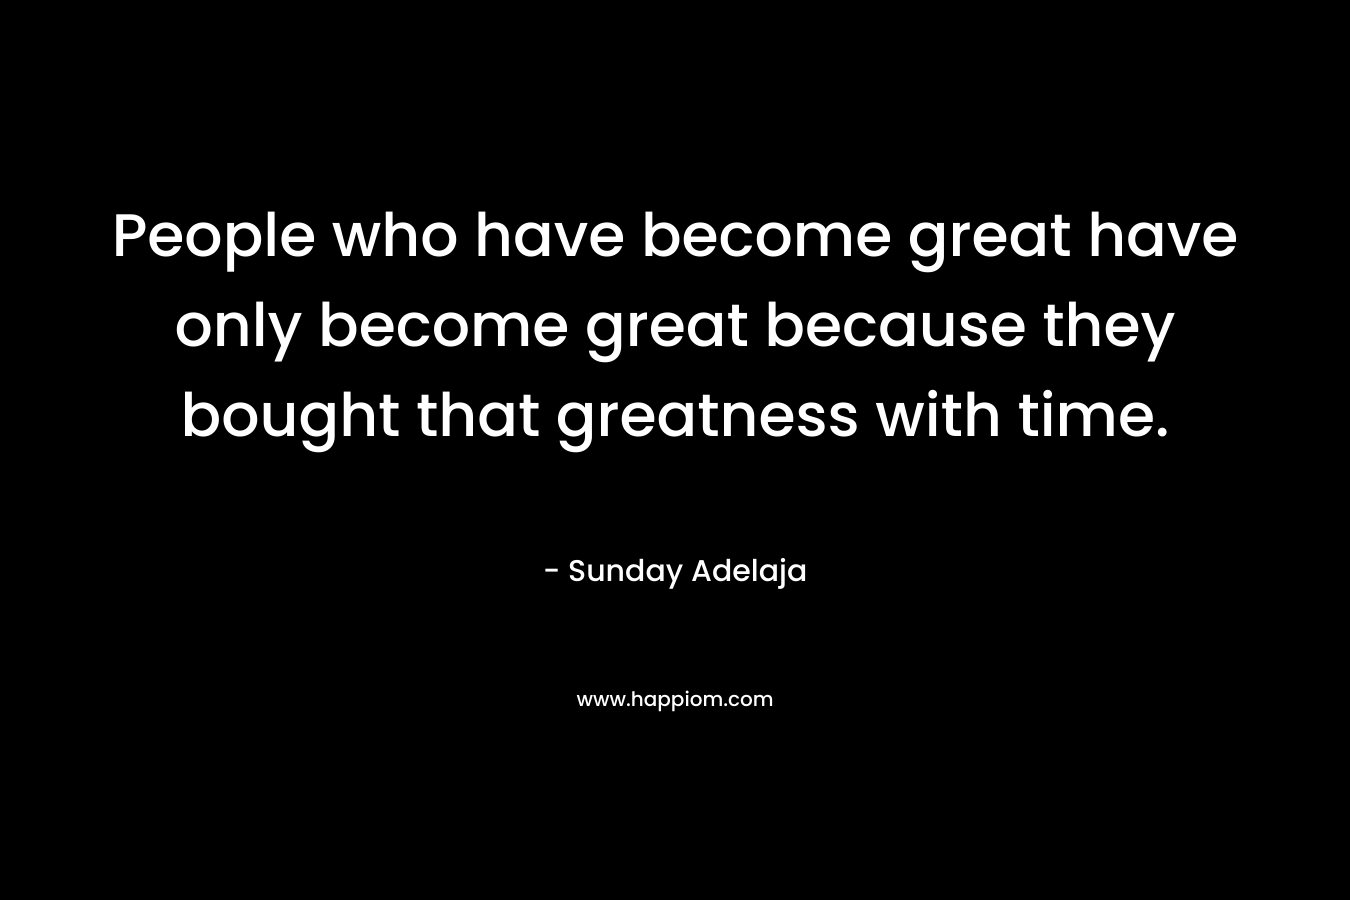 People who have become great have only become great because they bought that greatness with time.